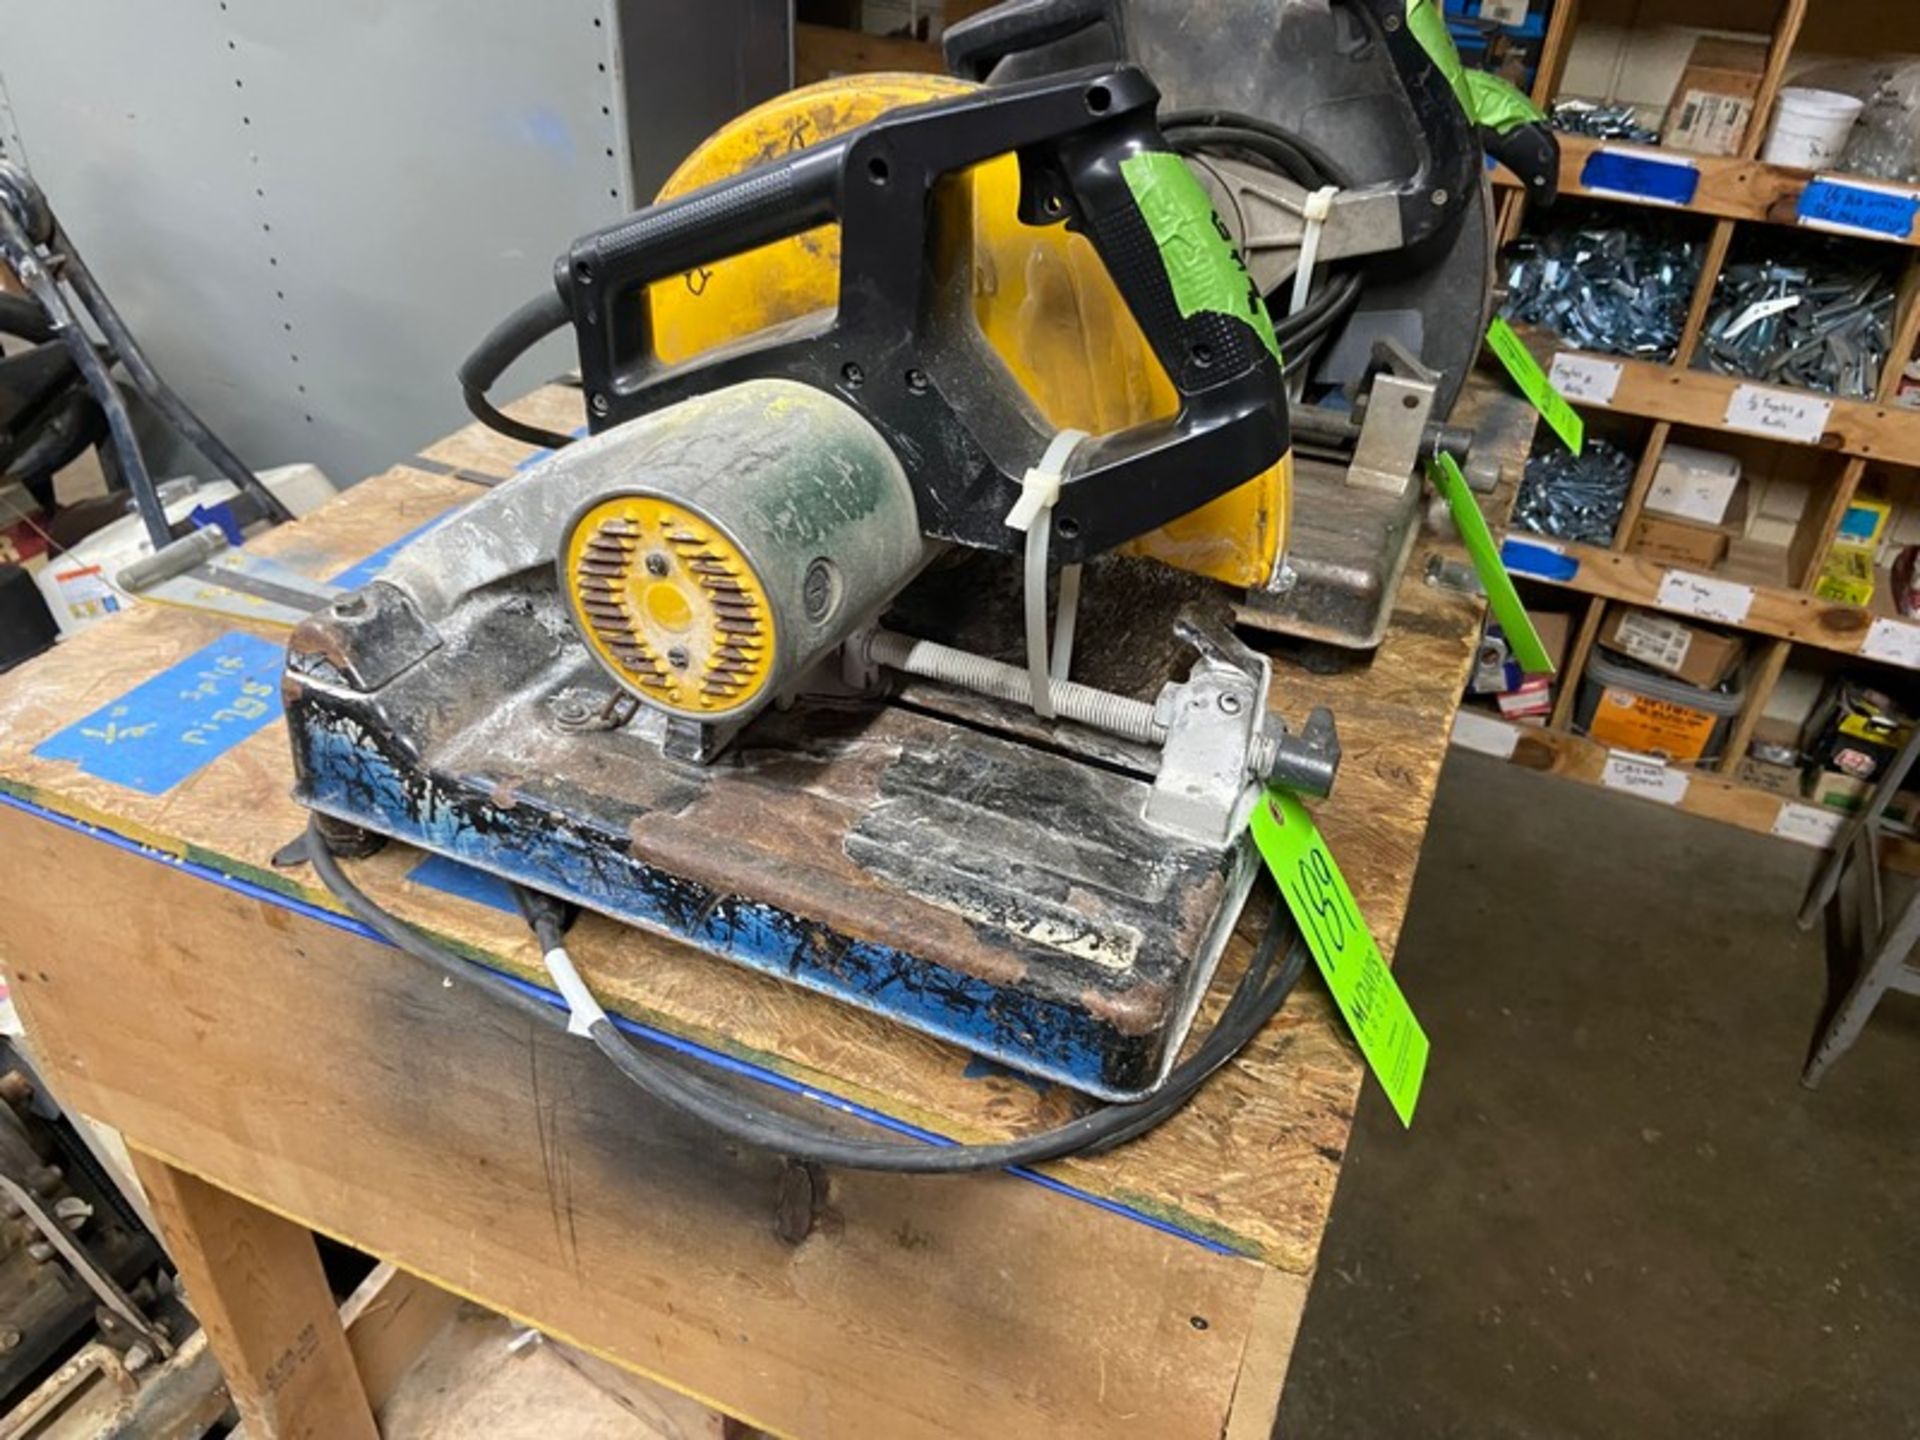 DeWalt 14” Abrasive Chop Saw, S/N 78523, 120 Volts (NOTE: No Blade) (LOCATED IN MONROEVILLE, PA)( - Image 5 of 5